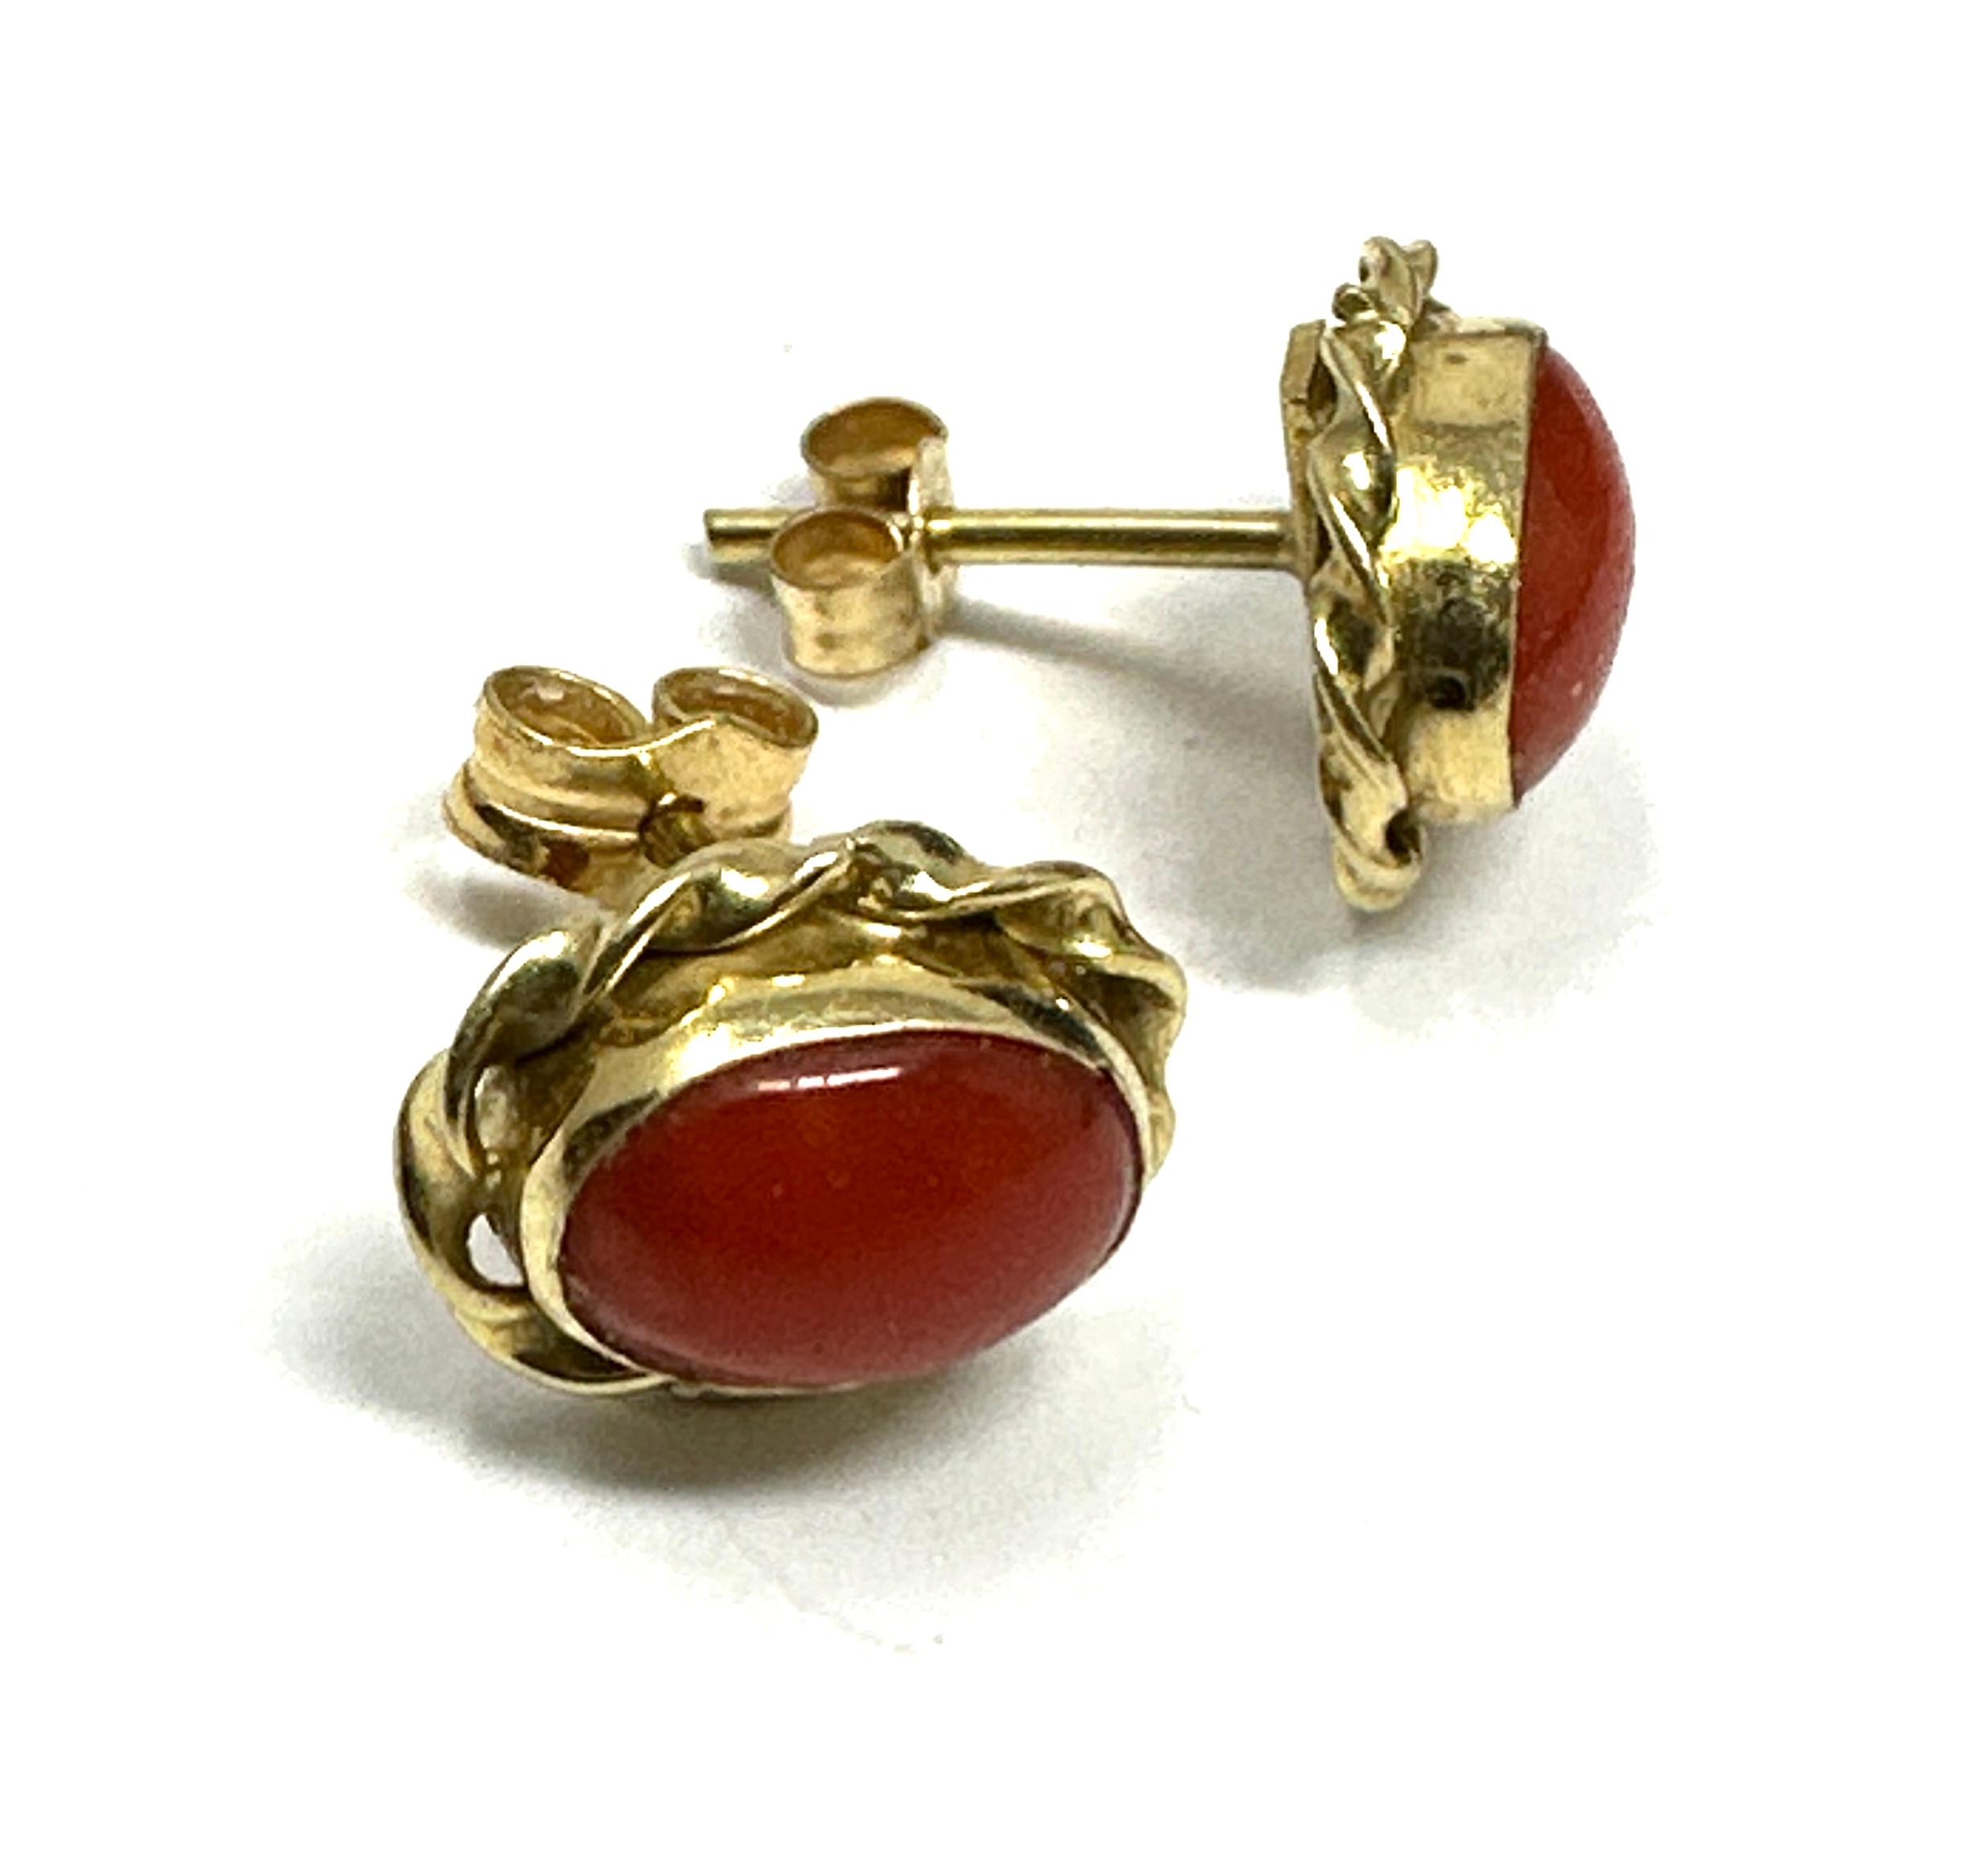 18ct gold coral earrings weight 2.5g - Image 2 of 3